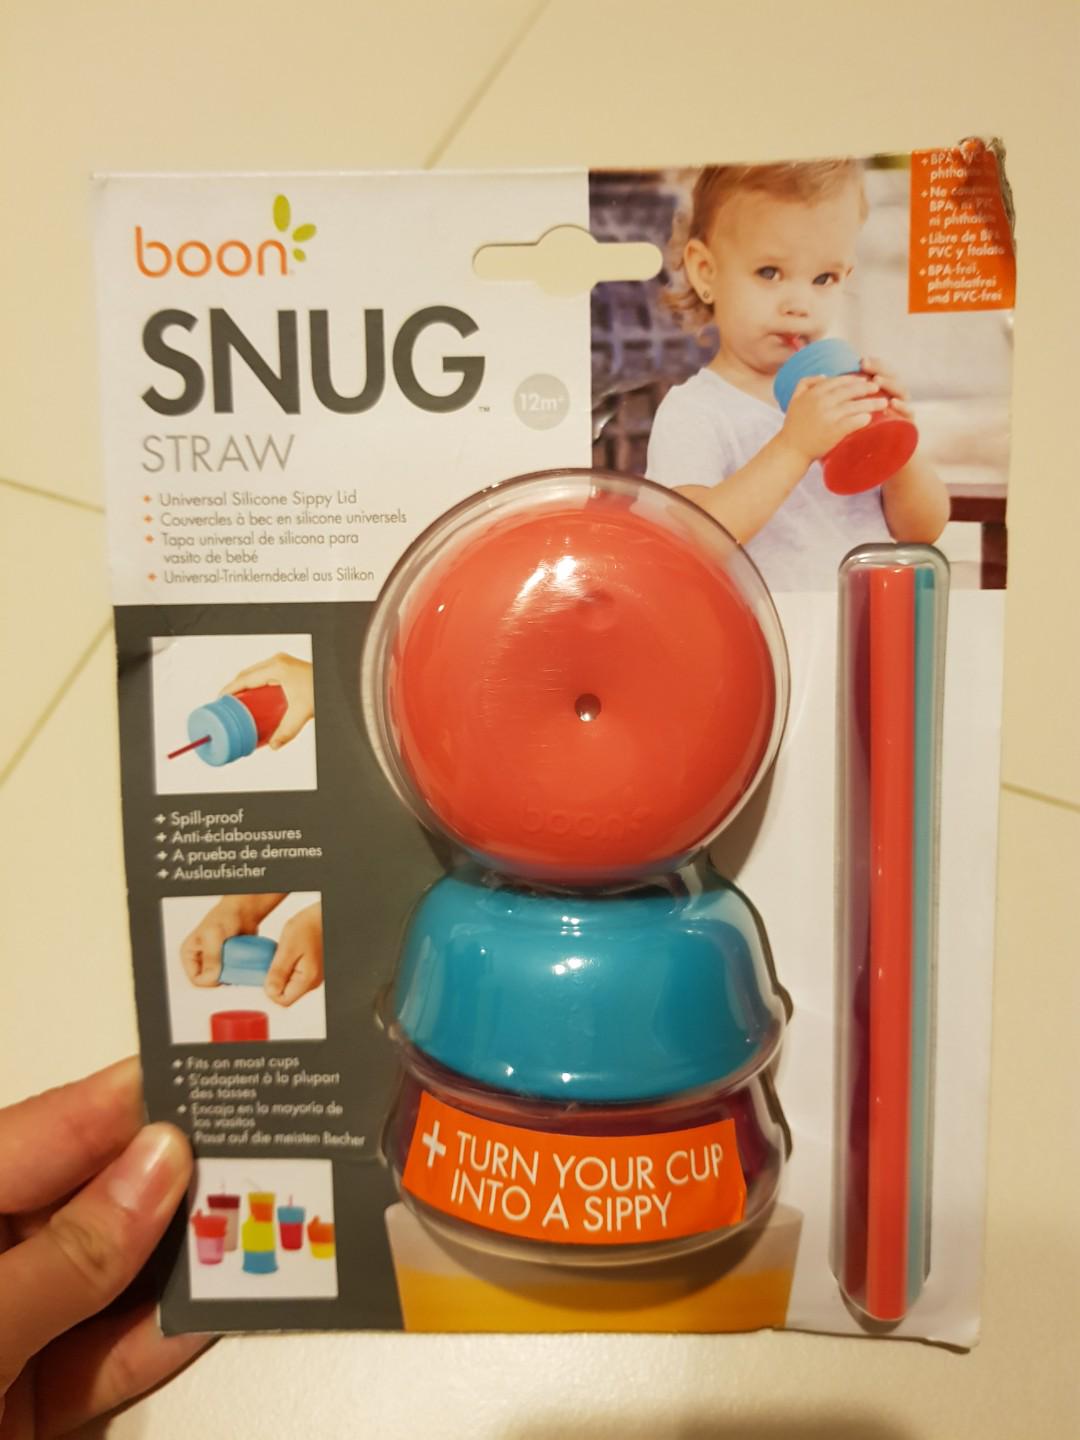 https://media.karousell.com/media/photos/products/2018/09/04/boon_snug_straw_universal_silicone_sippy_lid_1536066951_ca5e2d4d_progressive.jpg